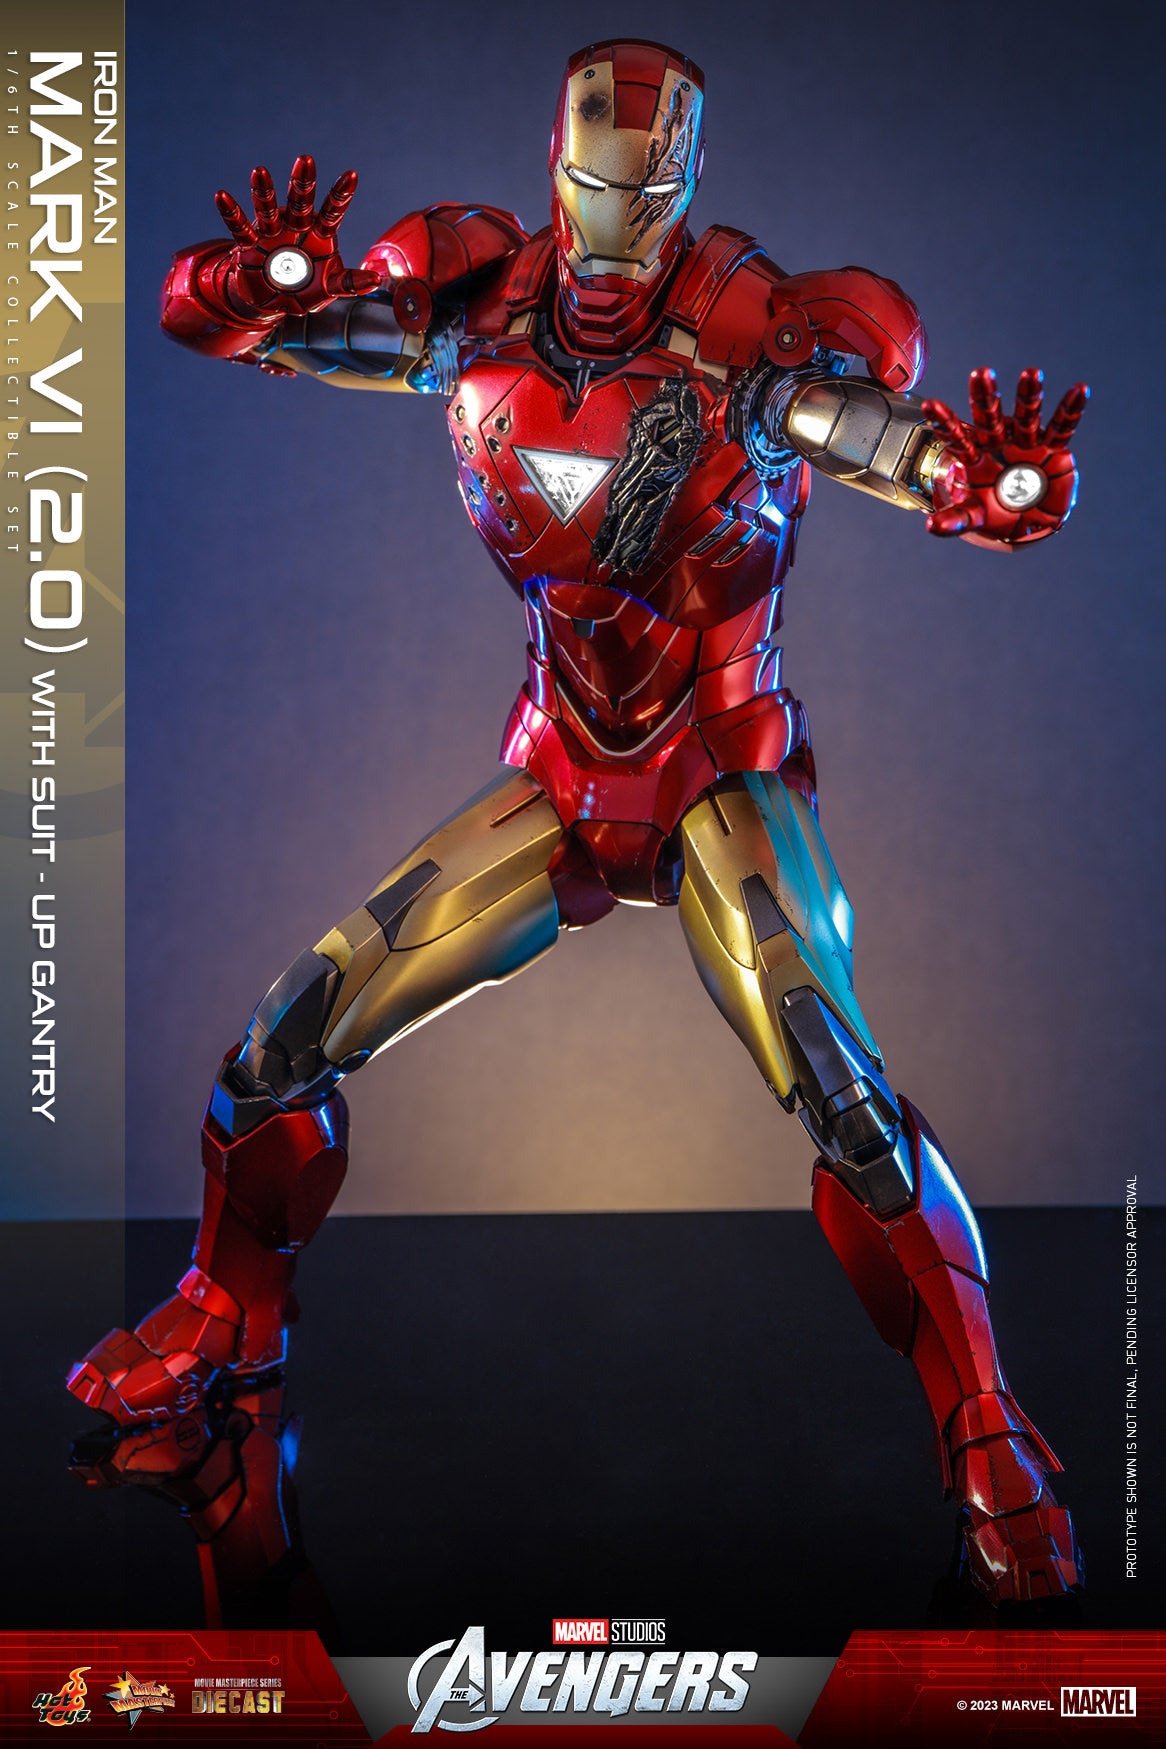 Iron Man: Mark VI (2.0): With Suit Up Gantry: Marvel: MMS688D53: Hot Toys